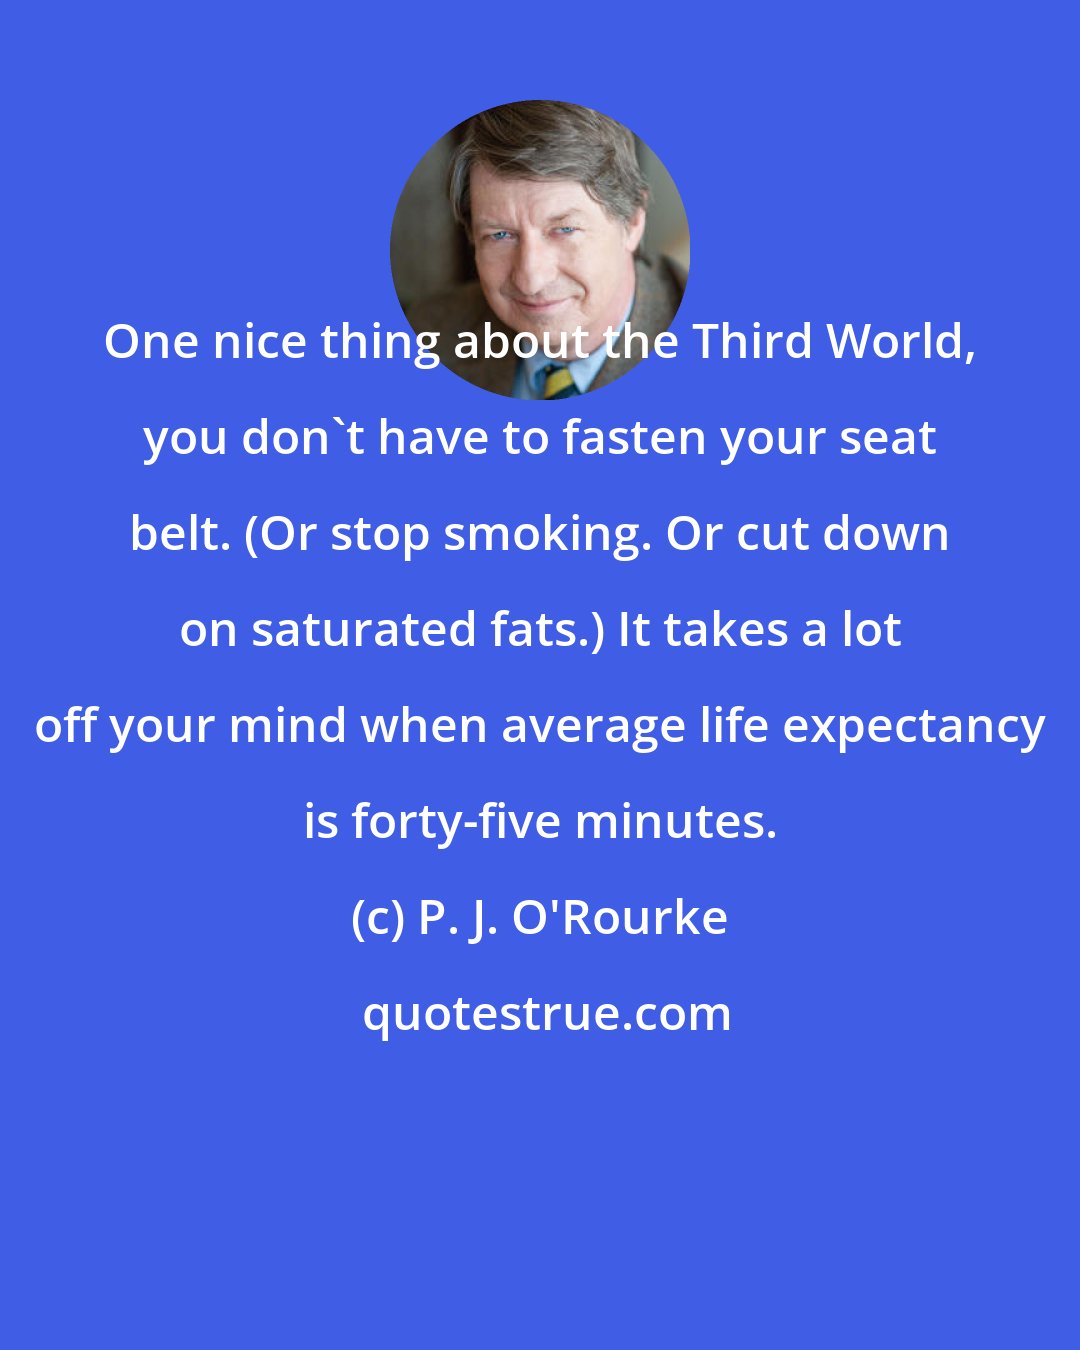 P. J. O'Rourke: One nice thing about the Third World, you don't have to fasten your seat belt. (Or stop smoking. Or cut down on saturated fats.) It takes a lot off your mind when average life expectancy is forty-five minutes.